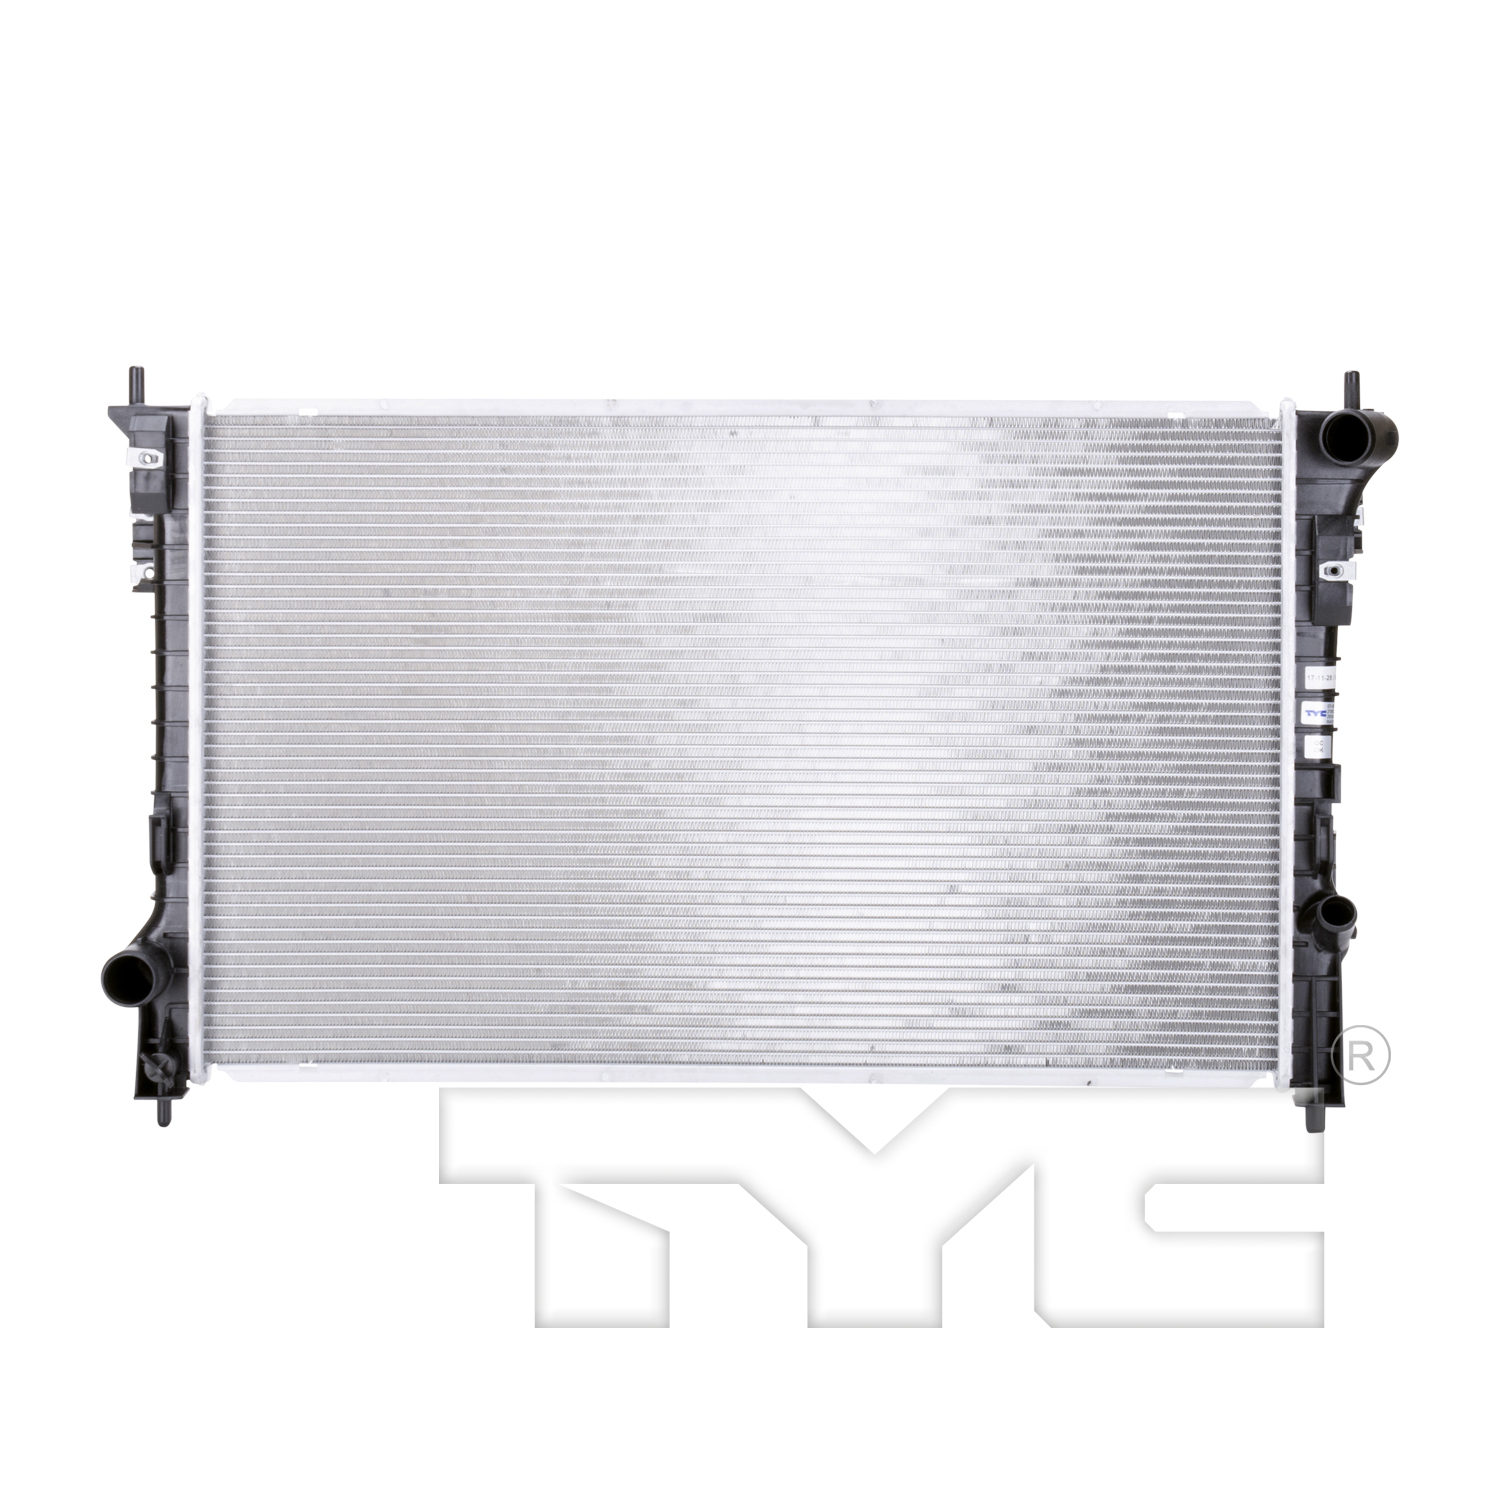 Aftermarket RADIATORS for FORD - EDGE, EDGE,07-14,Radiator assembly